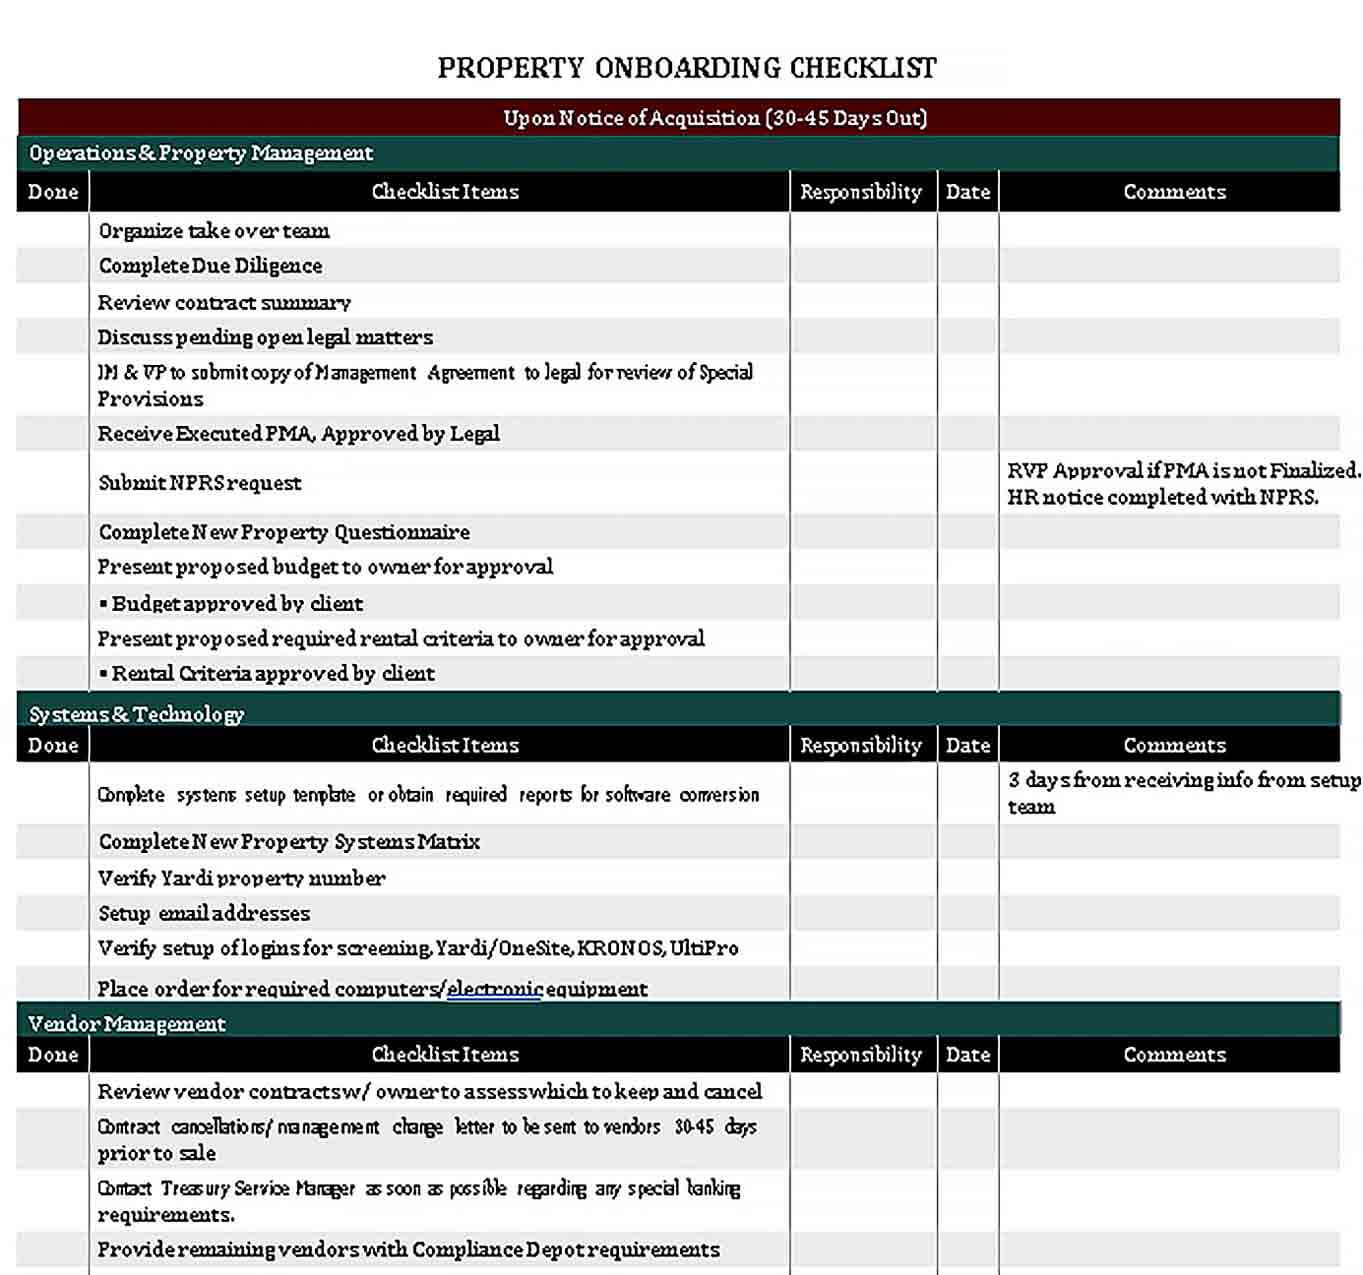 Sample Property Onboarding Checklist PDF Format Template